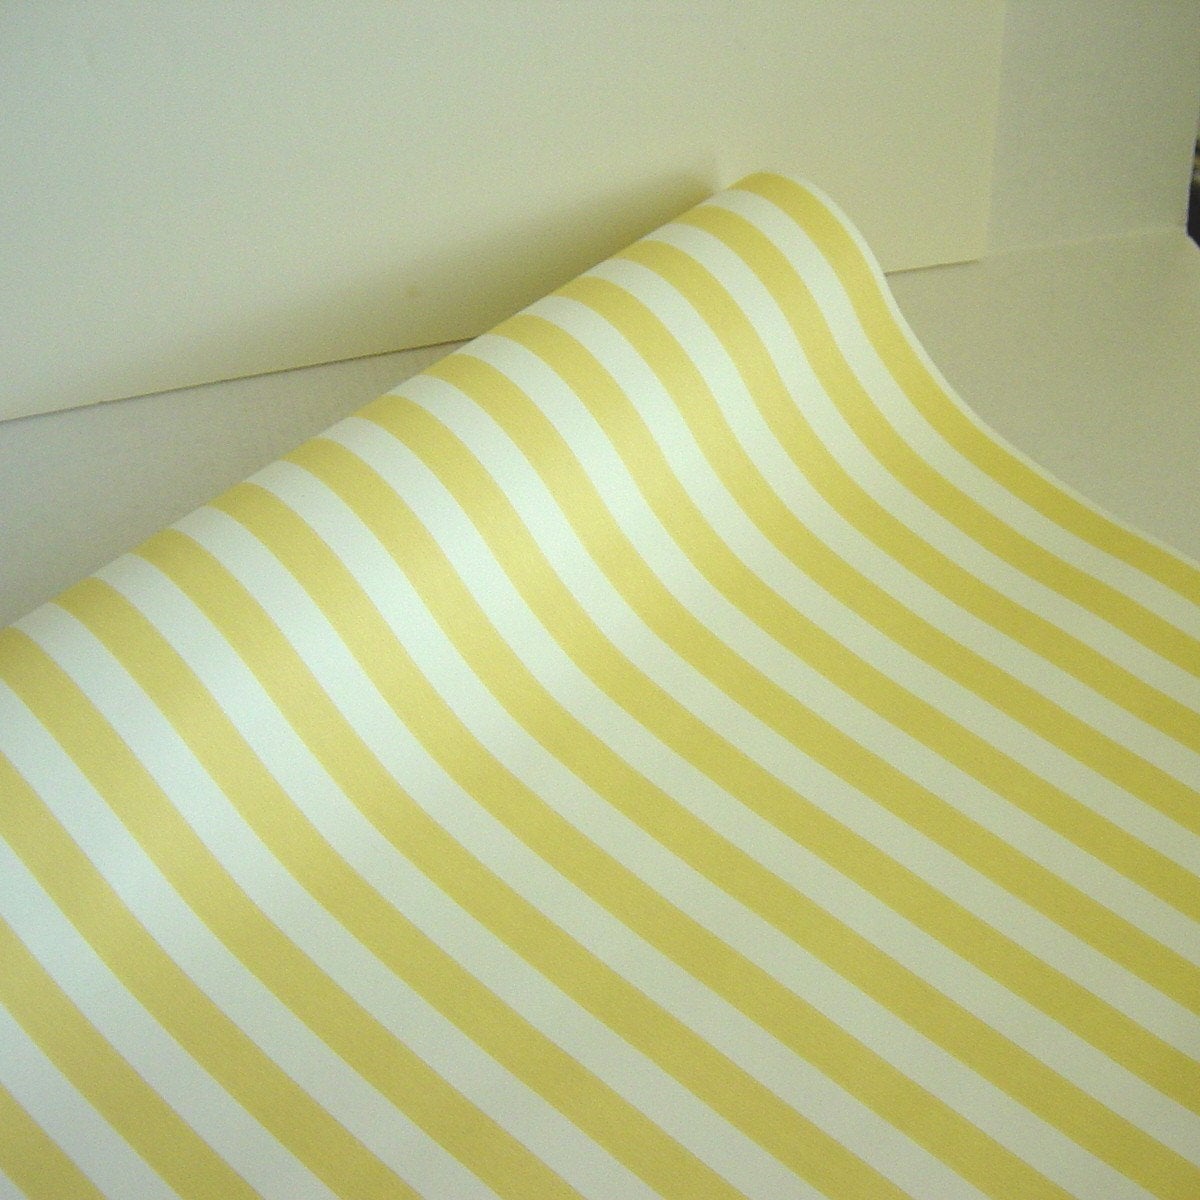 yellow and white wallpaper,yellow,textile,line,bed sheet,linens